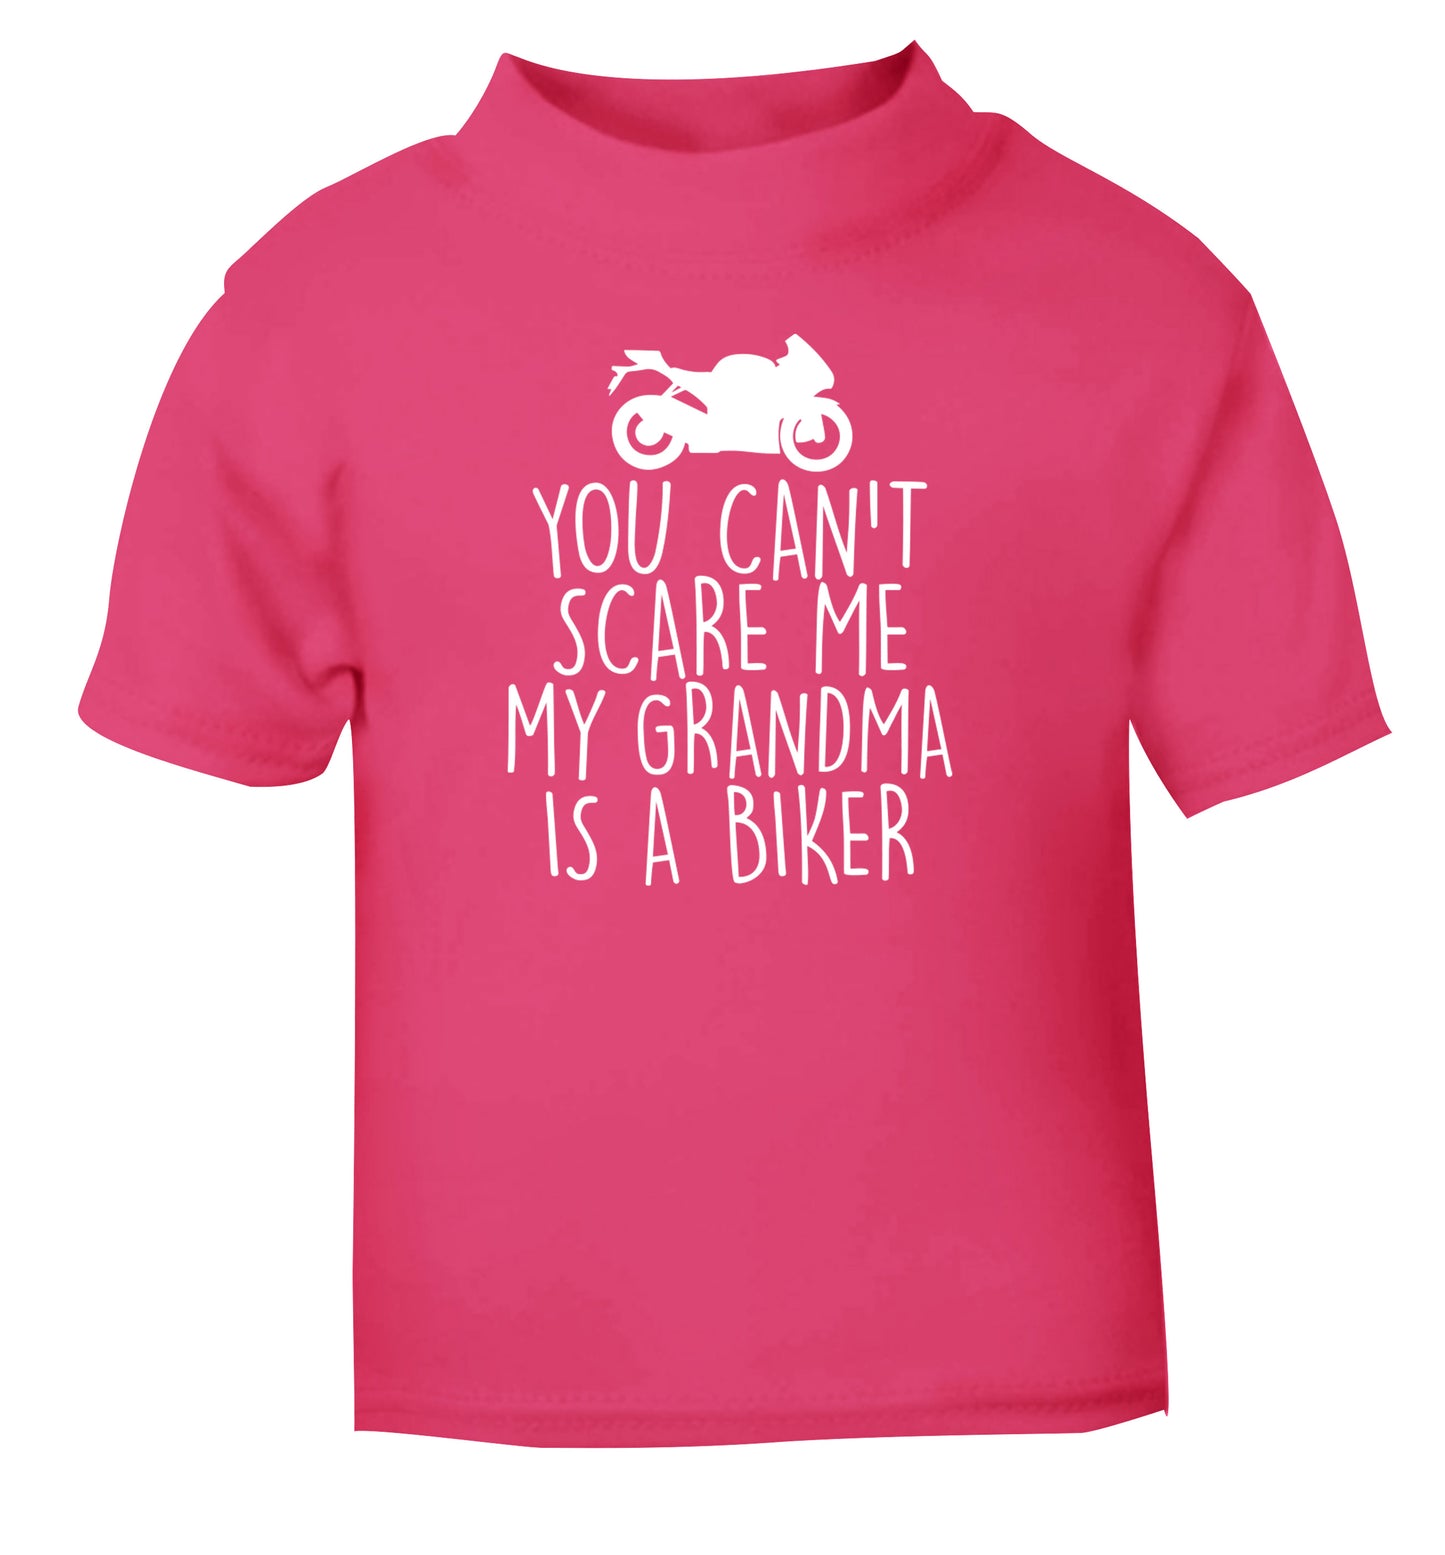 You can't scare me my grandma is a biker pink Baby Toddler Tshirt 2 Years